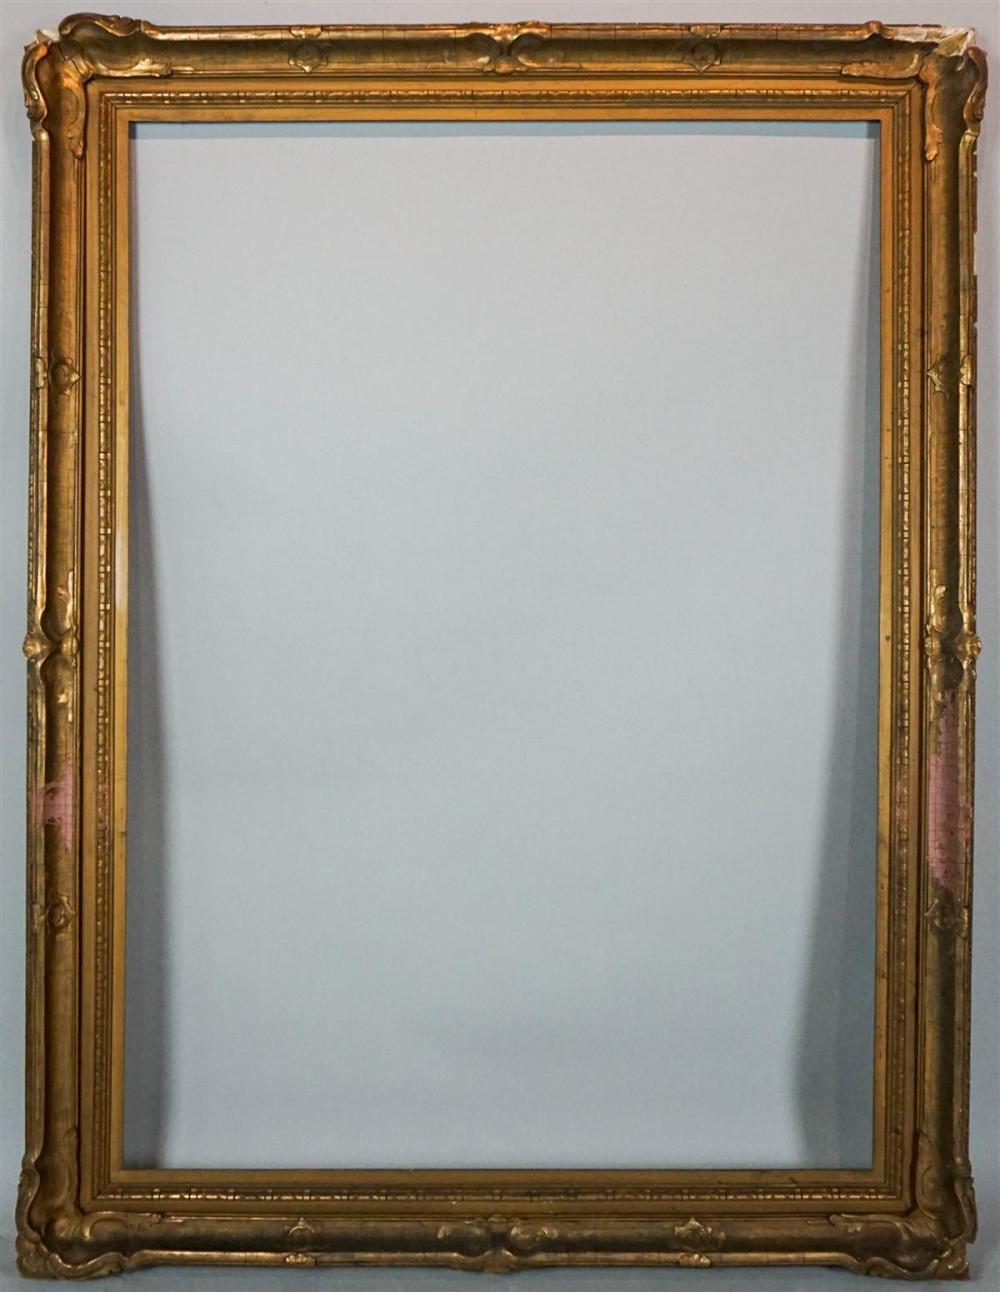 NEOCLASSICAL GILDED FRAME WITH 339db8